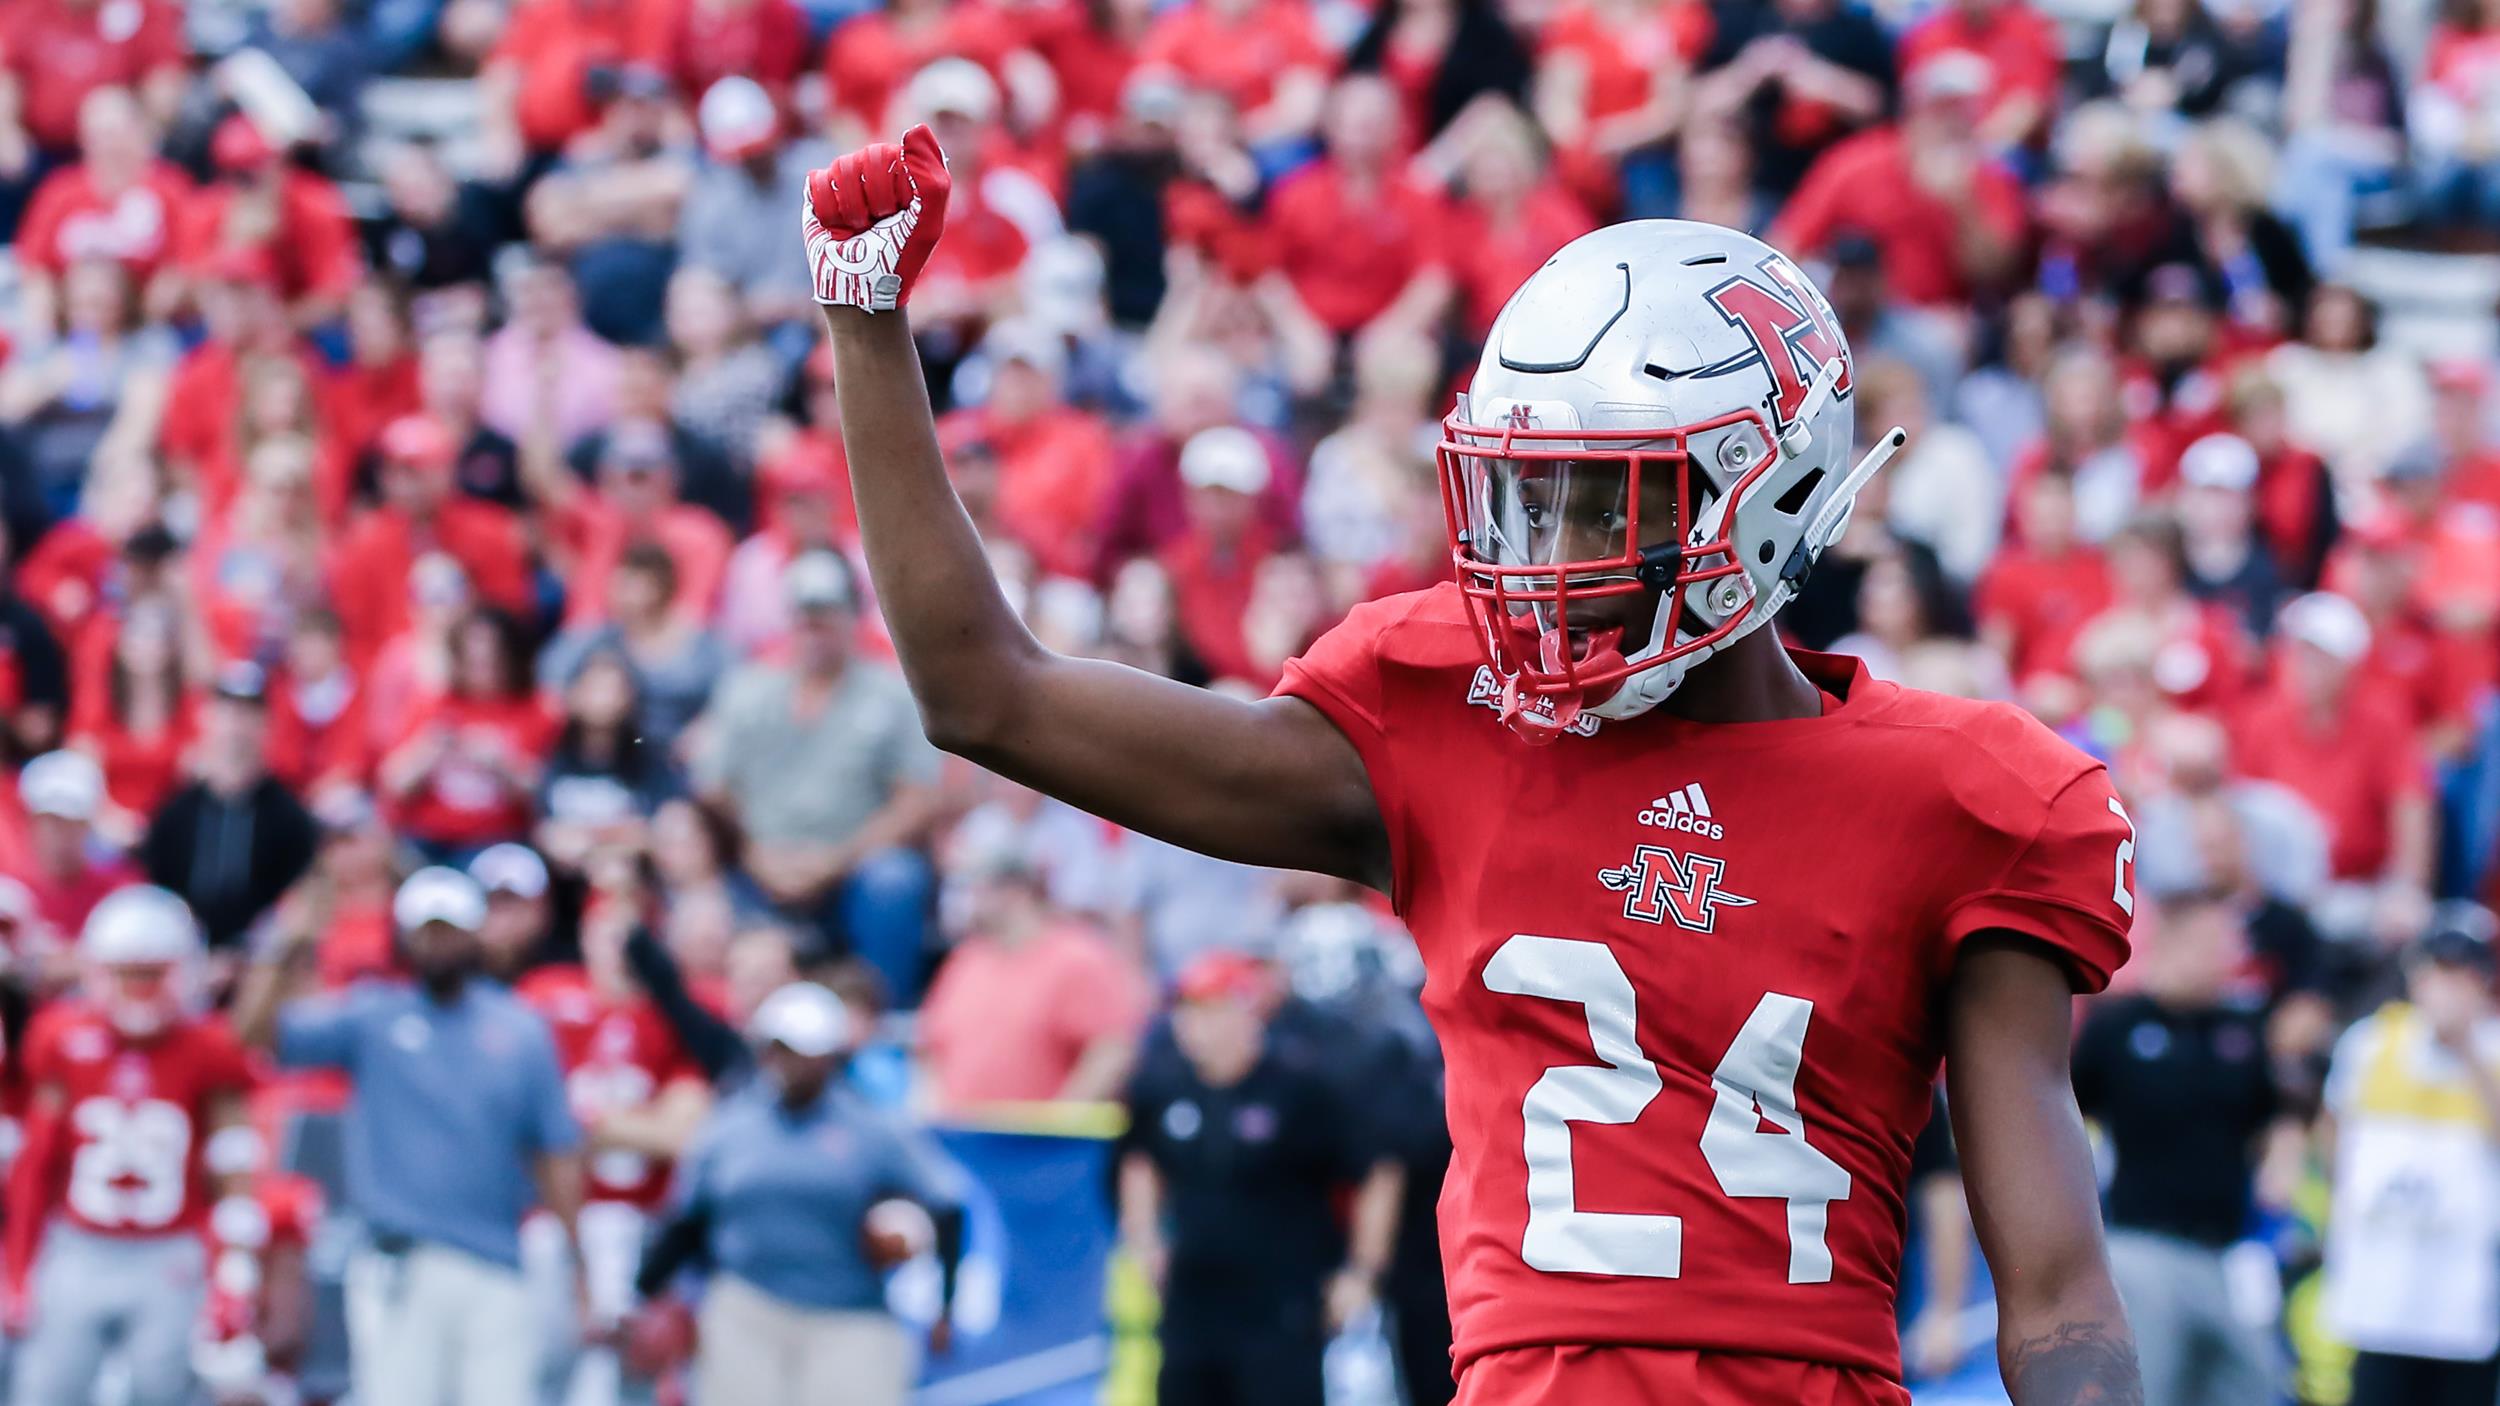 CSJ 2018 Second Round FCS Playoff Preview: Nicholls at Eastern Washington, How To Watch and Fearless Predictions